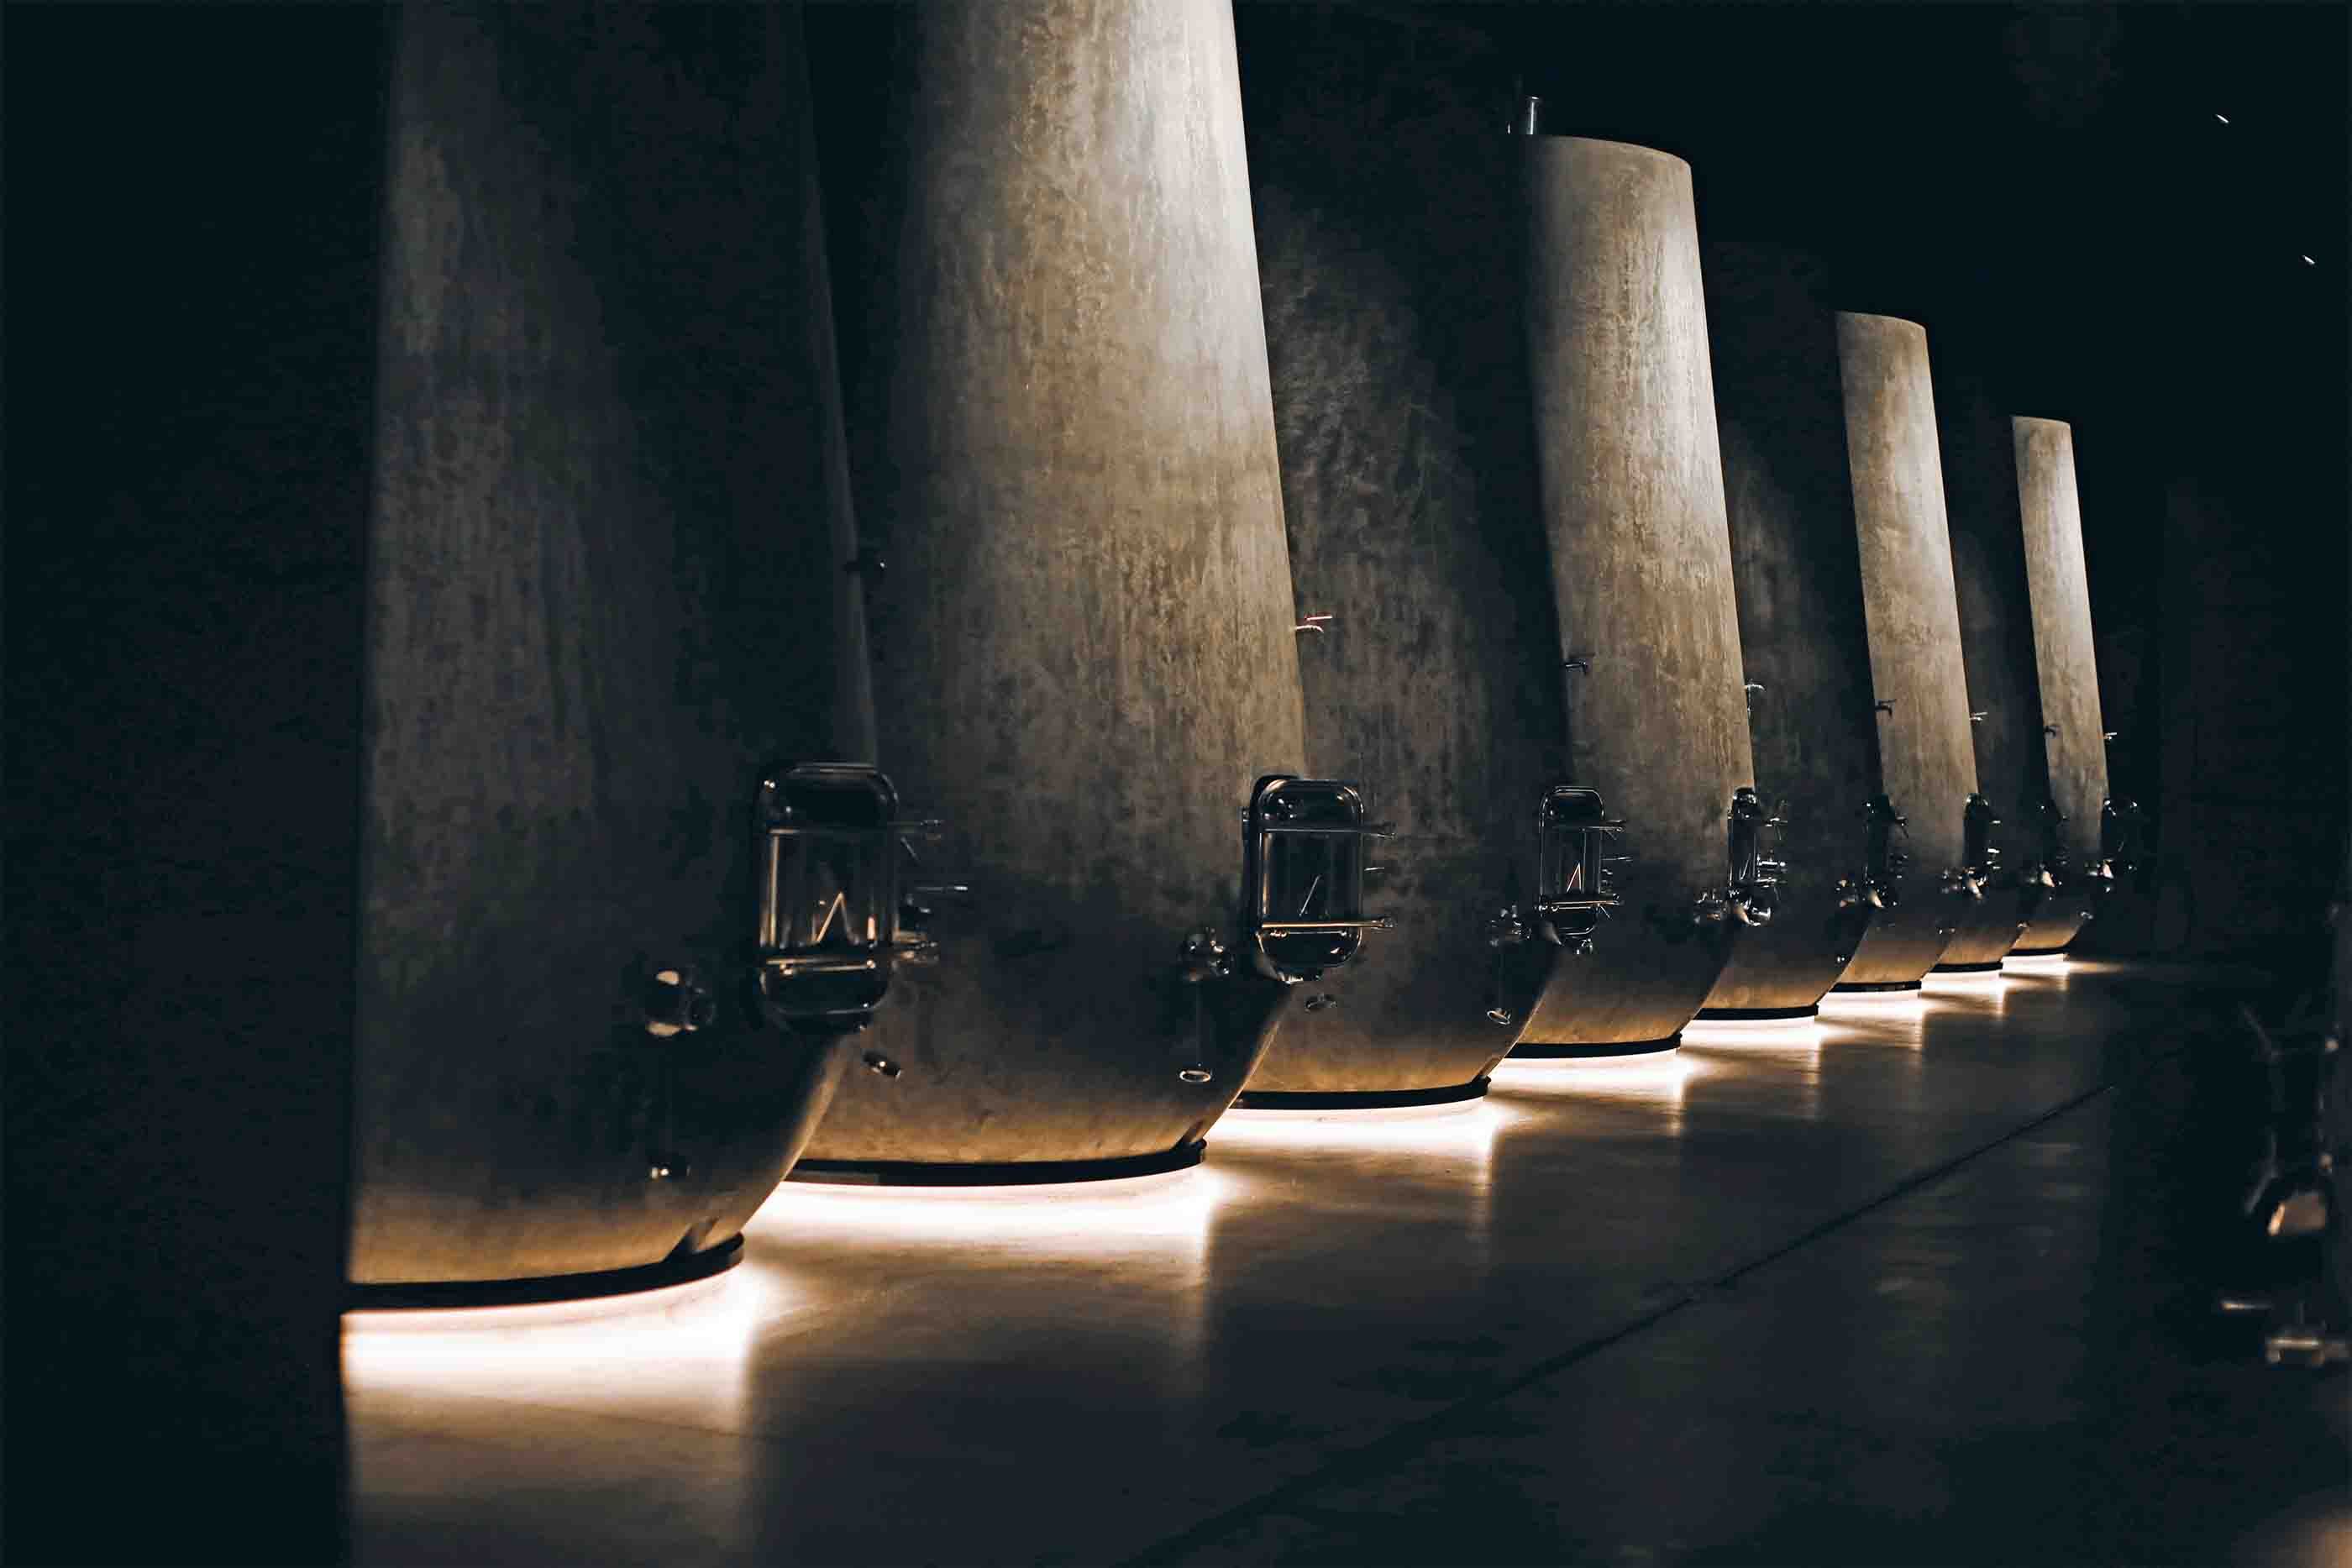 Sala Calvarino Cement tanks in which Pieropan's Calvarino cru is fermented and aged before bottling